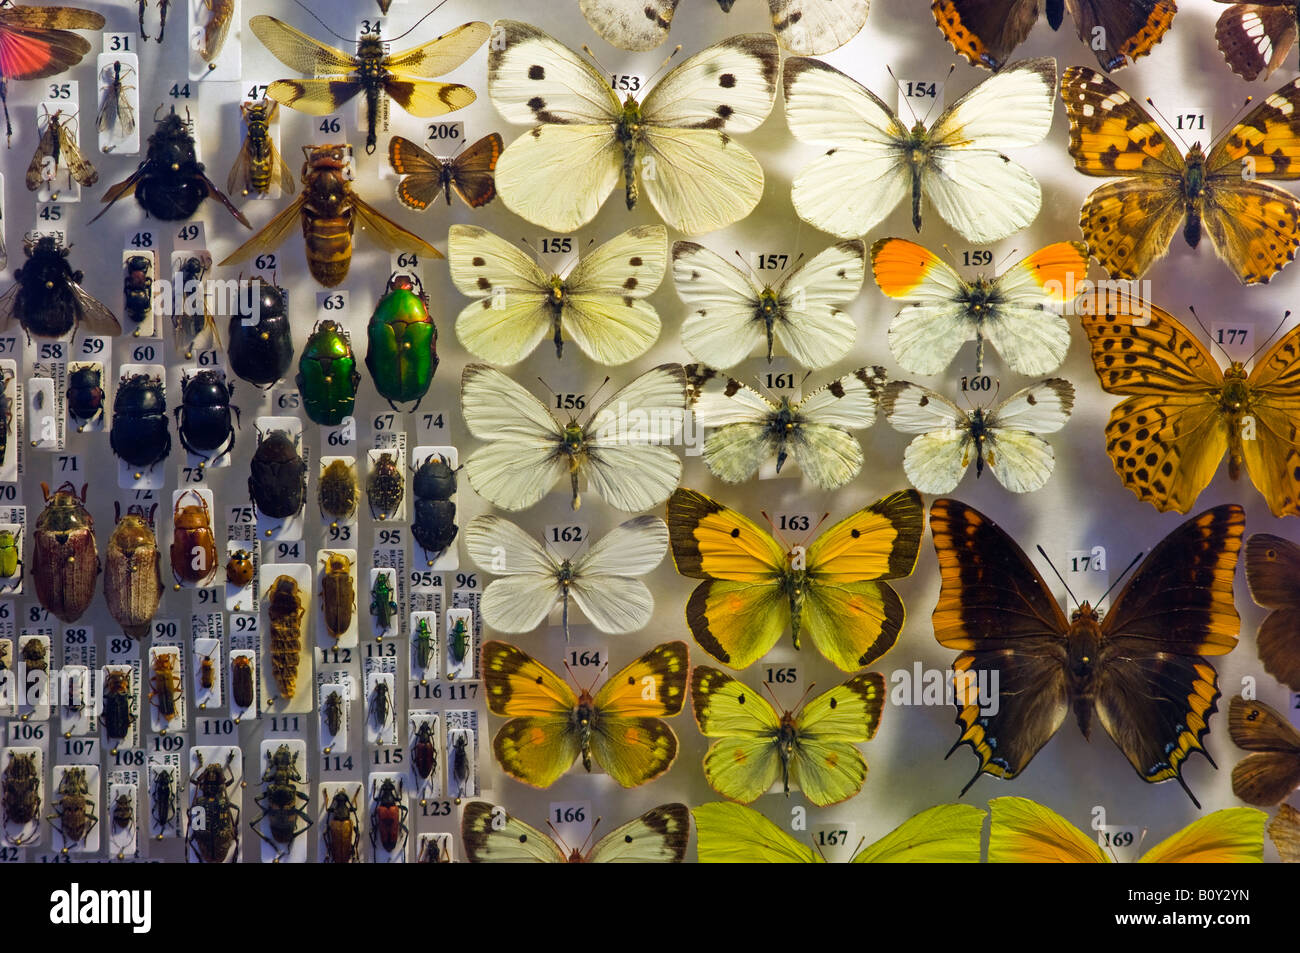 detail of an insect collection Stock Photo